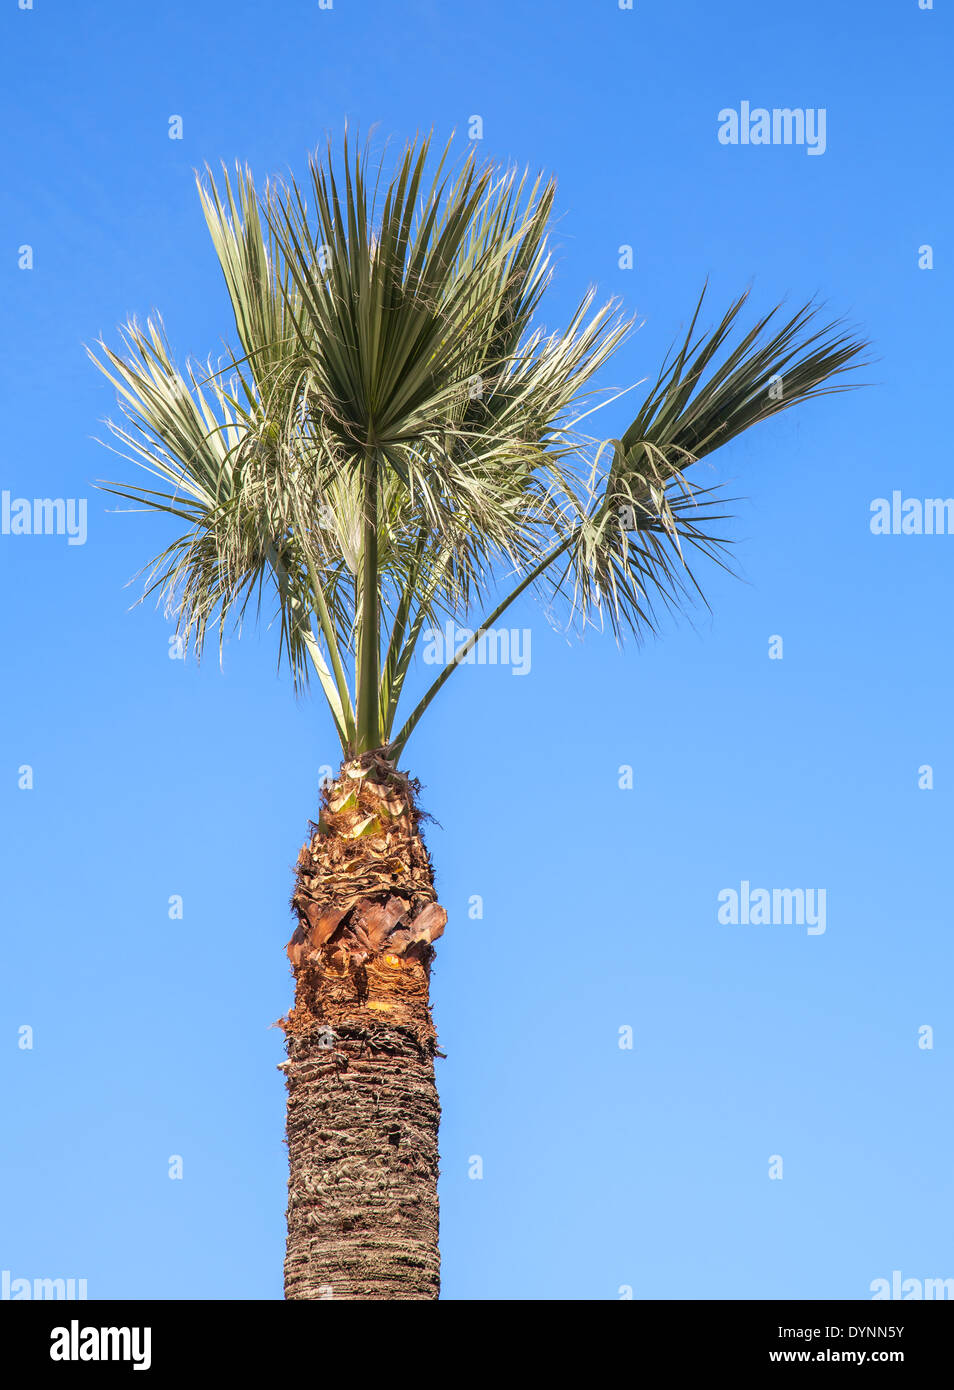 Small palm tree above clear blue sky background Stock Photo